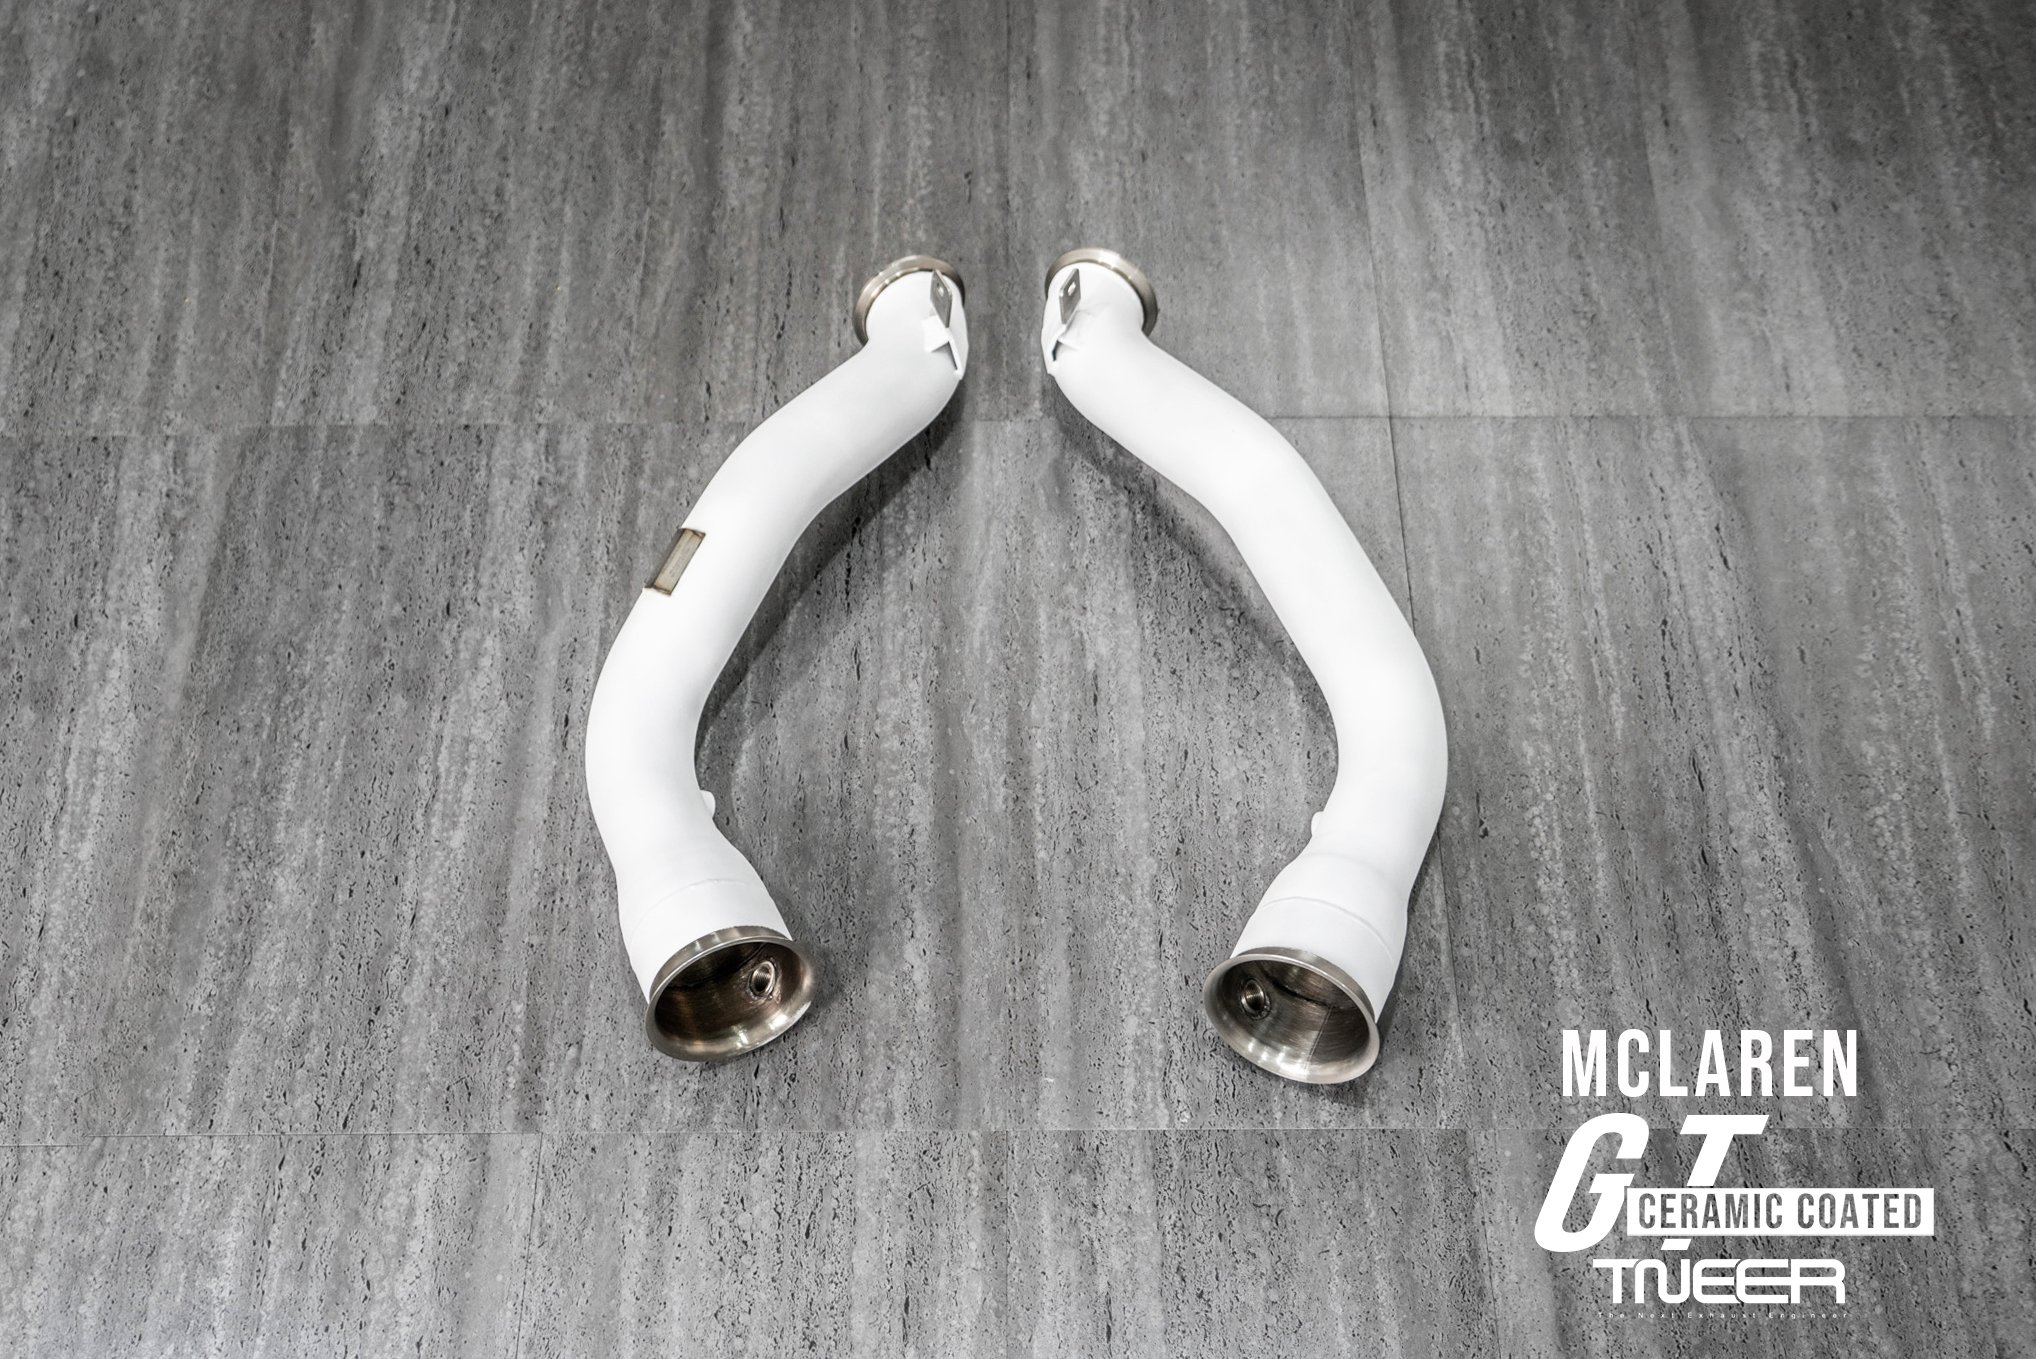 Milltek Audi S3 Cat-Back Exhaust System with Polished Trims